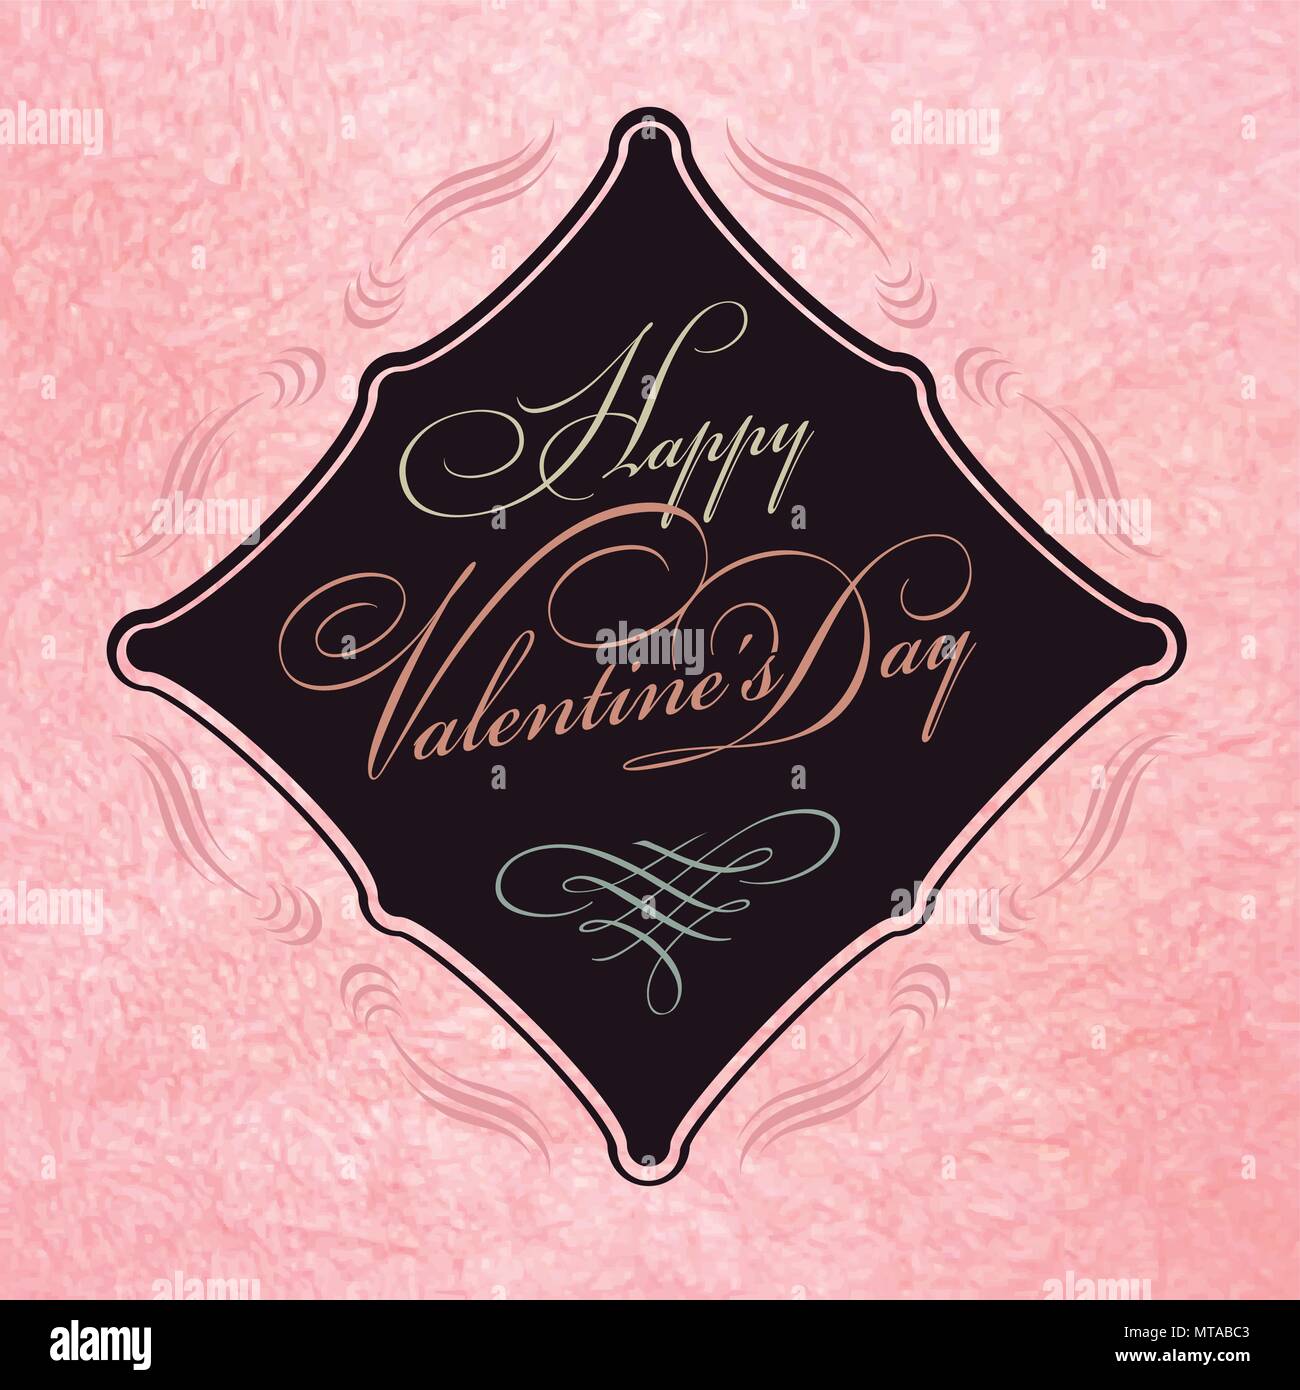 Happy valentines day card with ornaments and letterings Stock Vector